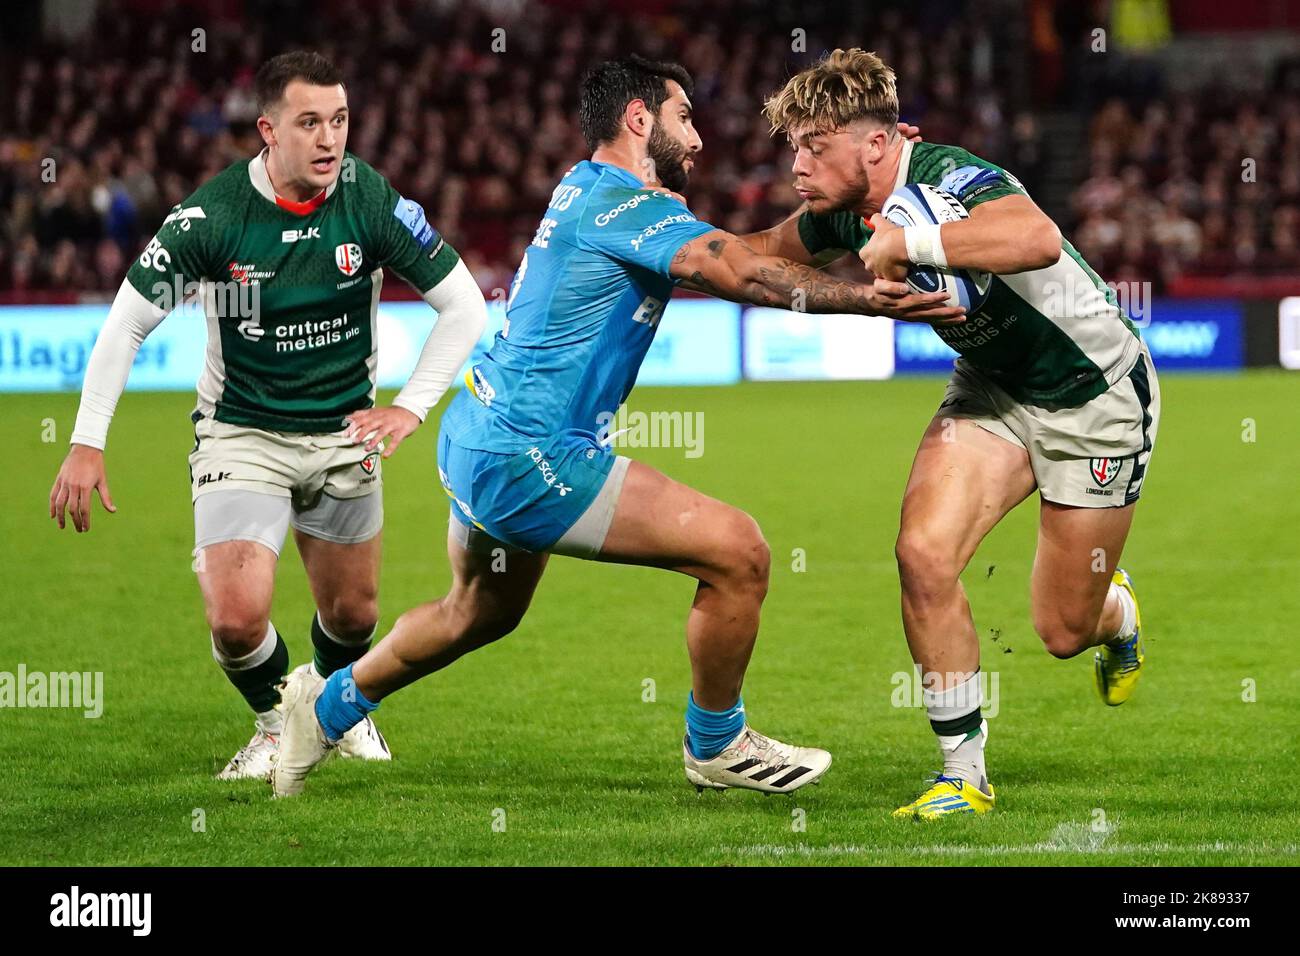 London Irish's Ollie Hassell-Collins is tackled by Gloucester Rugby's Giorgi Kveseldze during the Gallagher Premiership match at the Gtech Community Stadium, London. Picture date: Friday October 21, 2022. Stock Photo